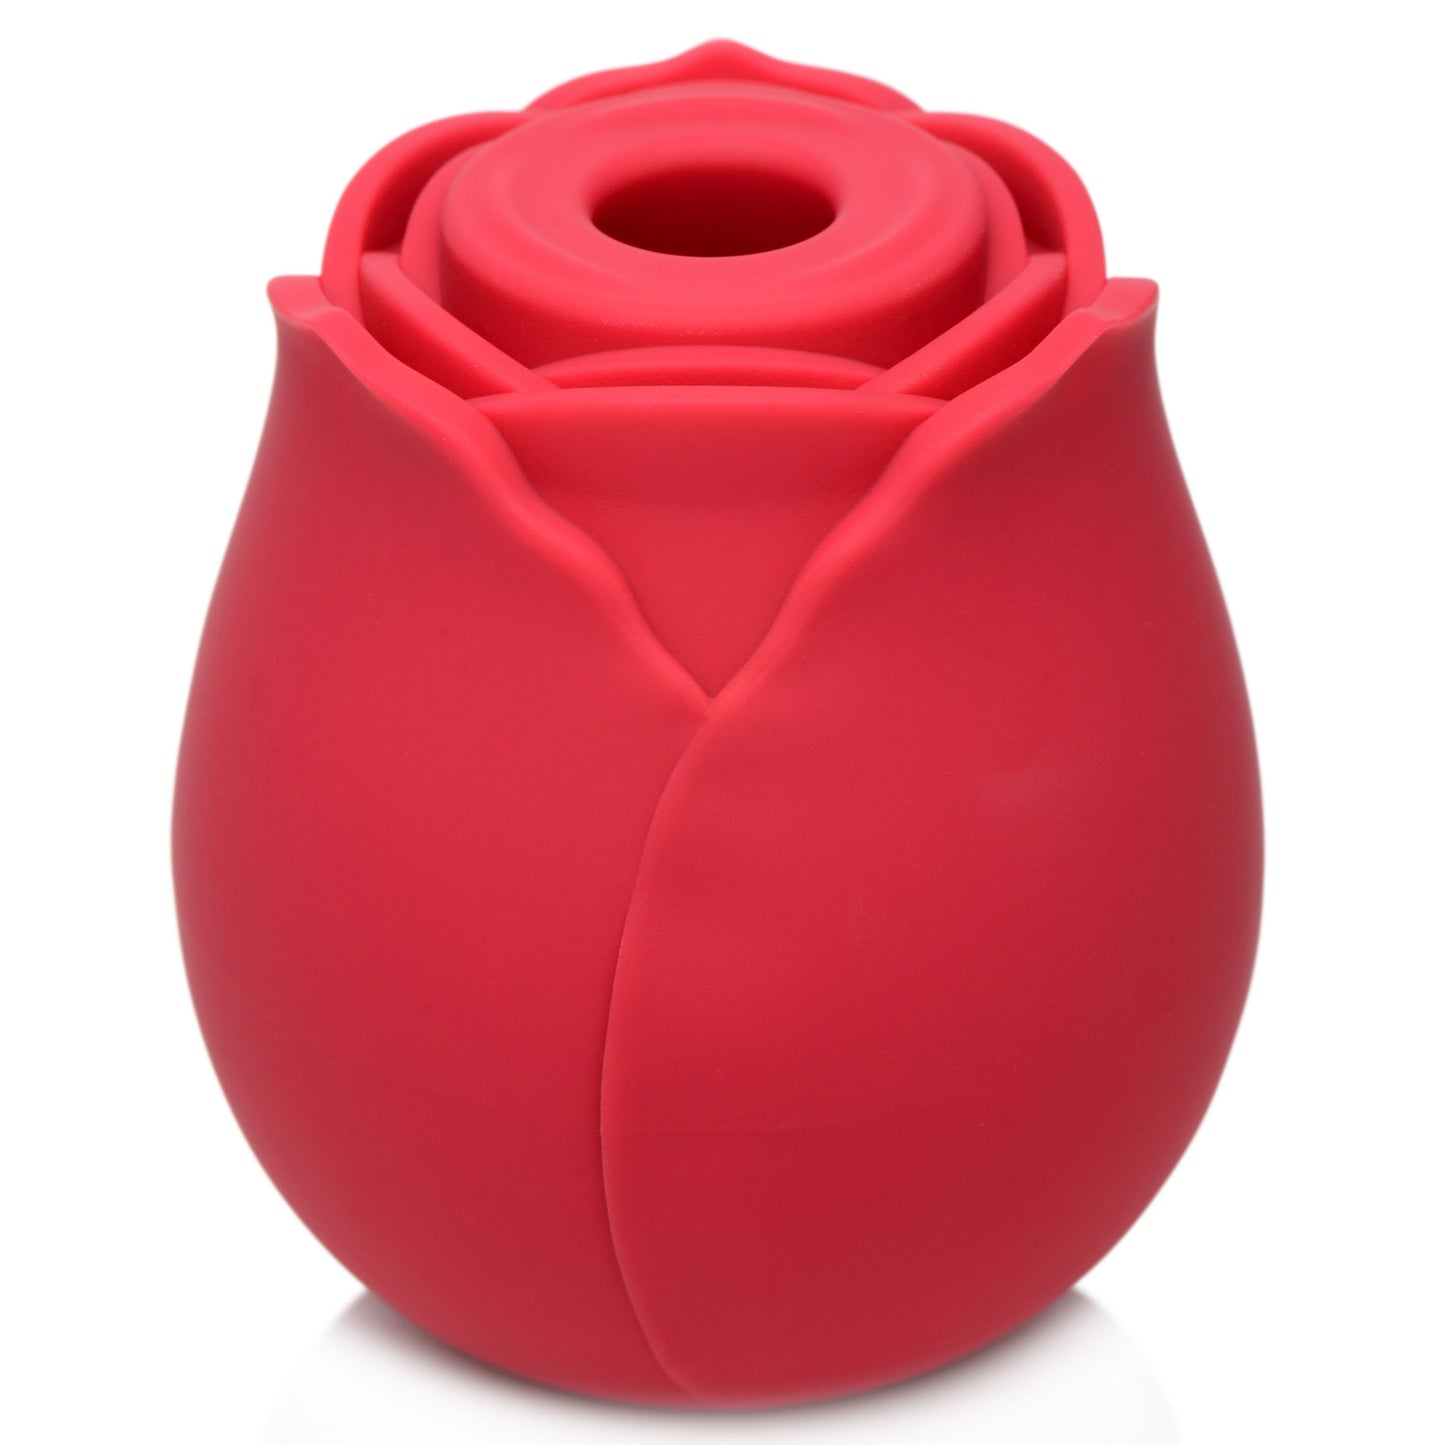 The Rose Lover's Gift Box 10x Clit Suction Rose - Red